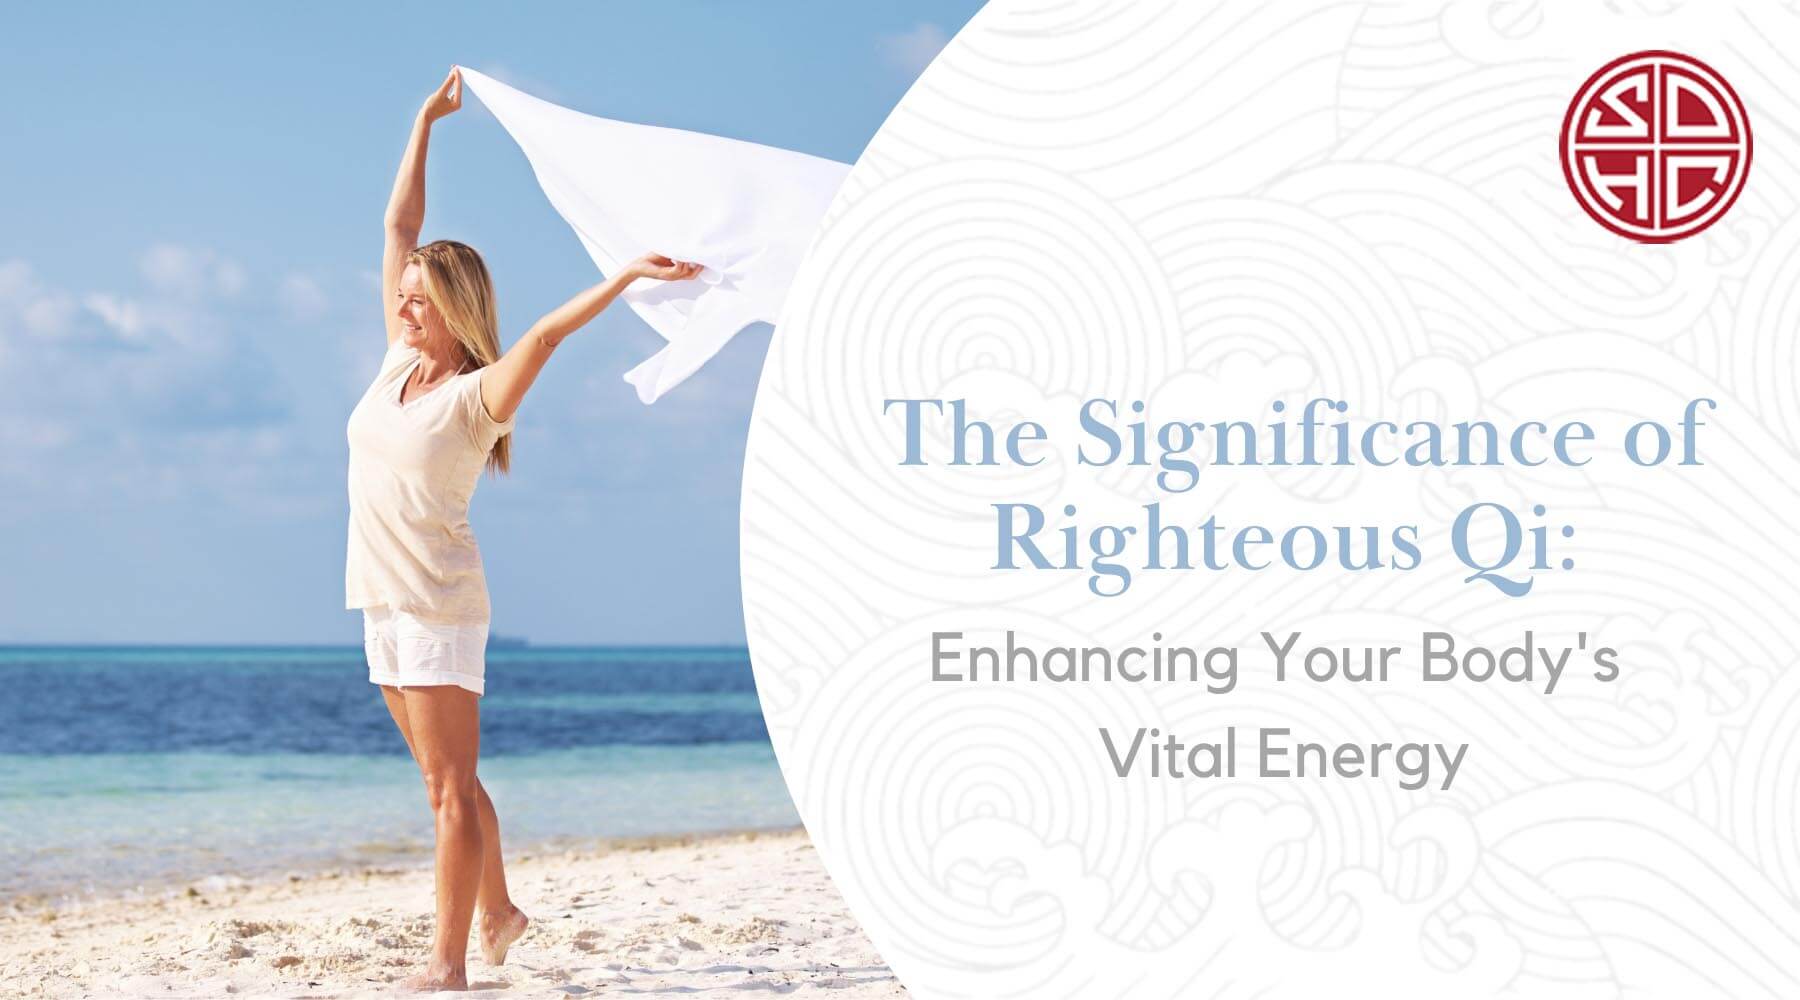 The Significance of Righteous Qi: Enhancing Your Body's Vital Energy